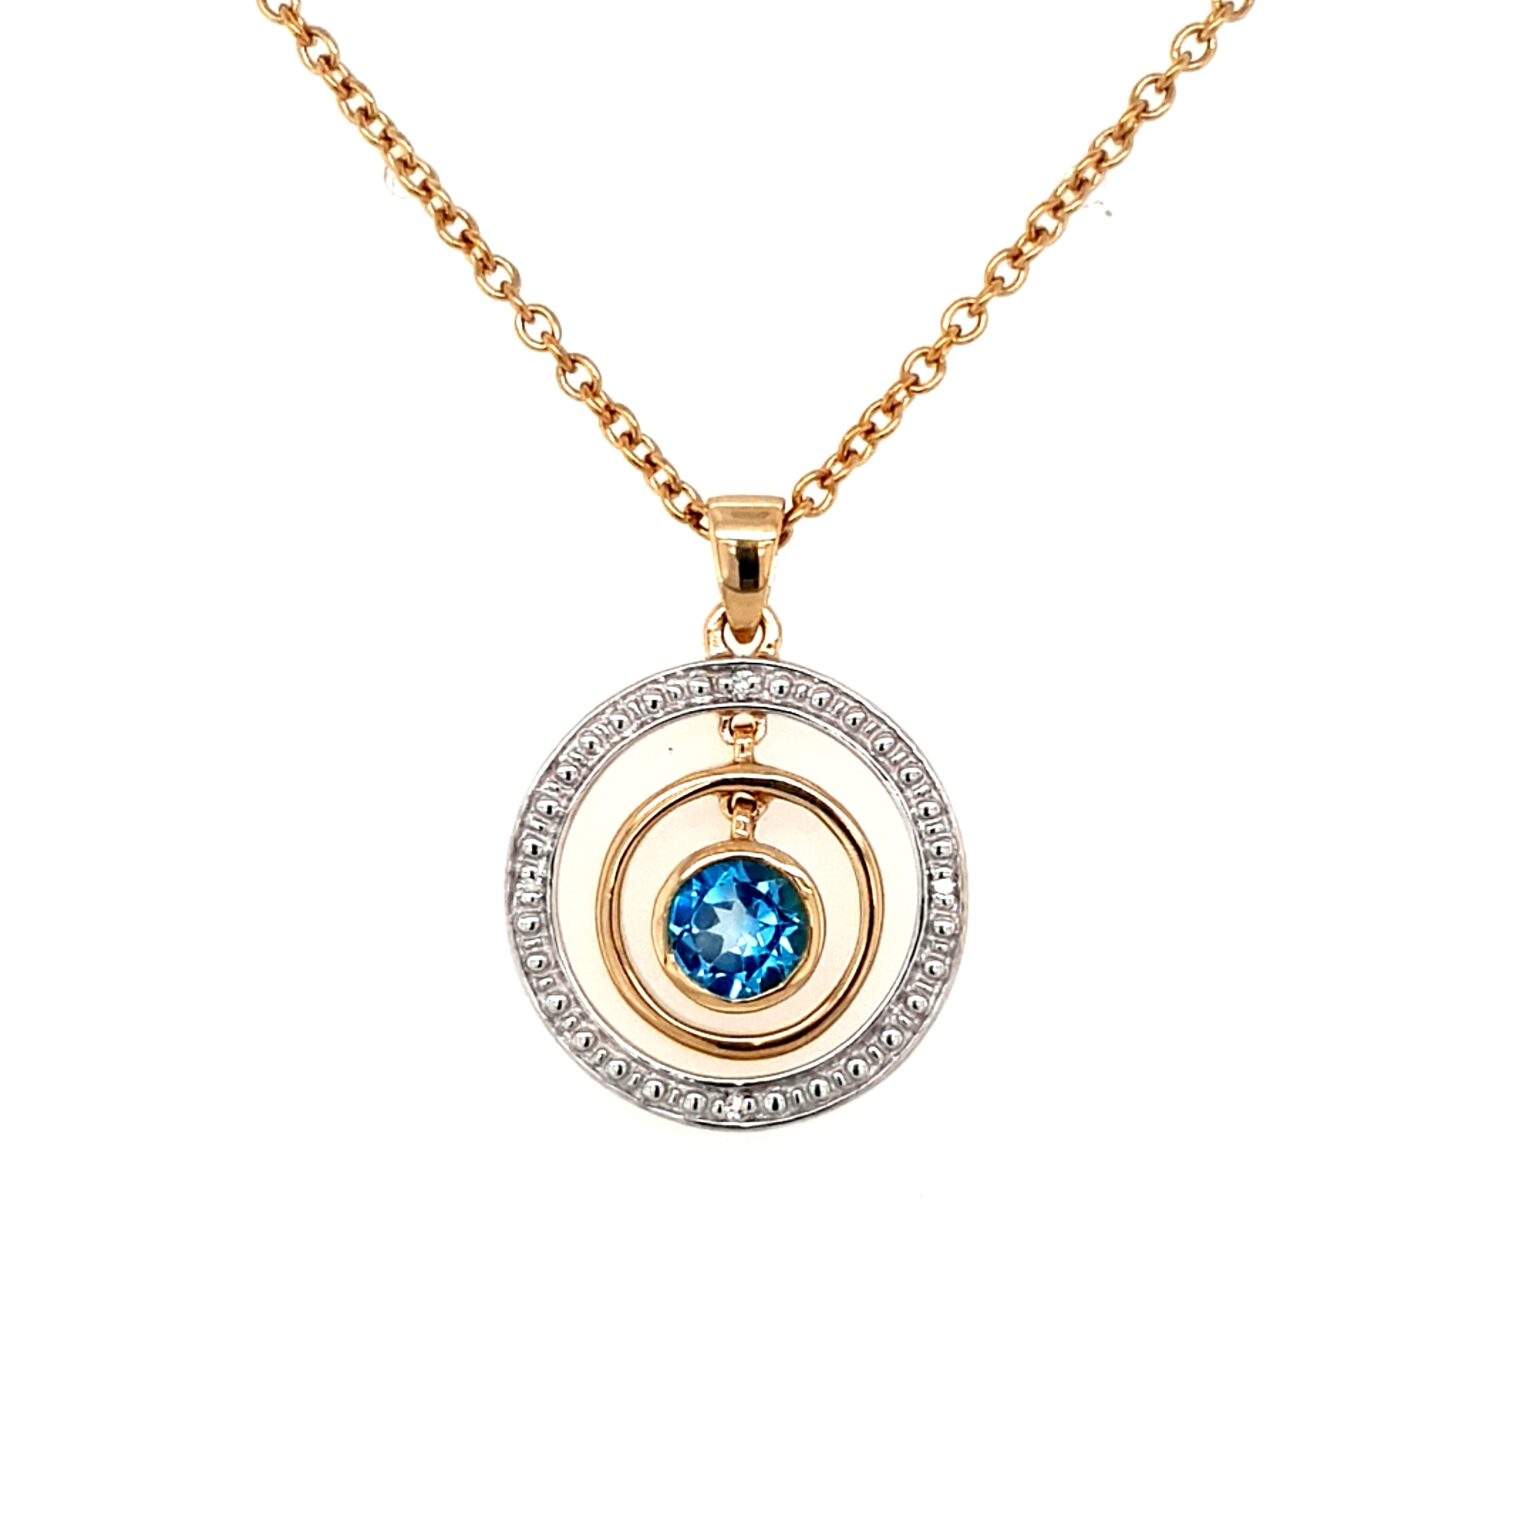 Leon Baker 9K White and Yellow Gold Circular Pendant with Diamonds and Blue Topaz_0